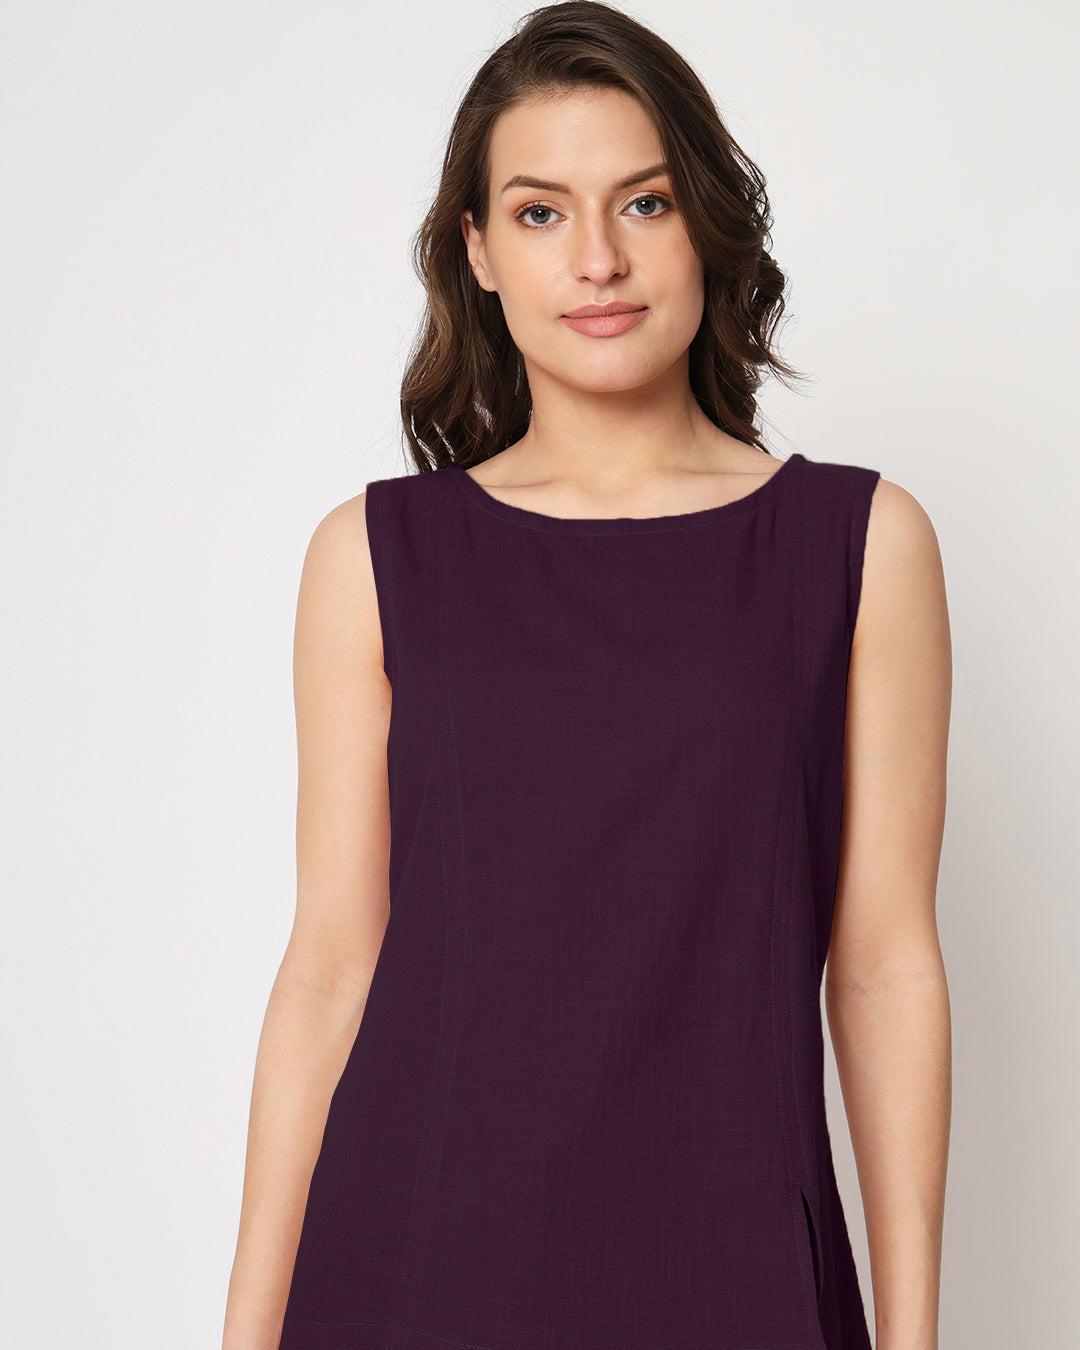 Plum Passion Sleeveless Short Length Solid Top (Without Bottoms)